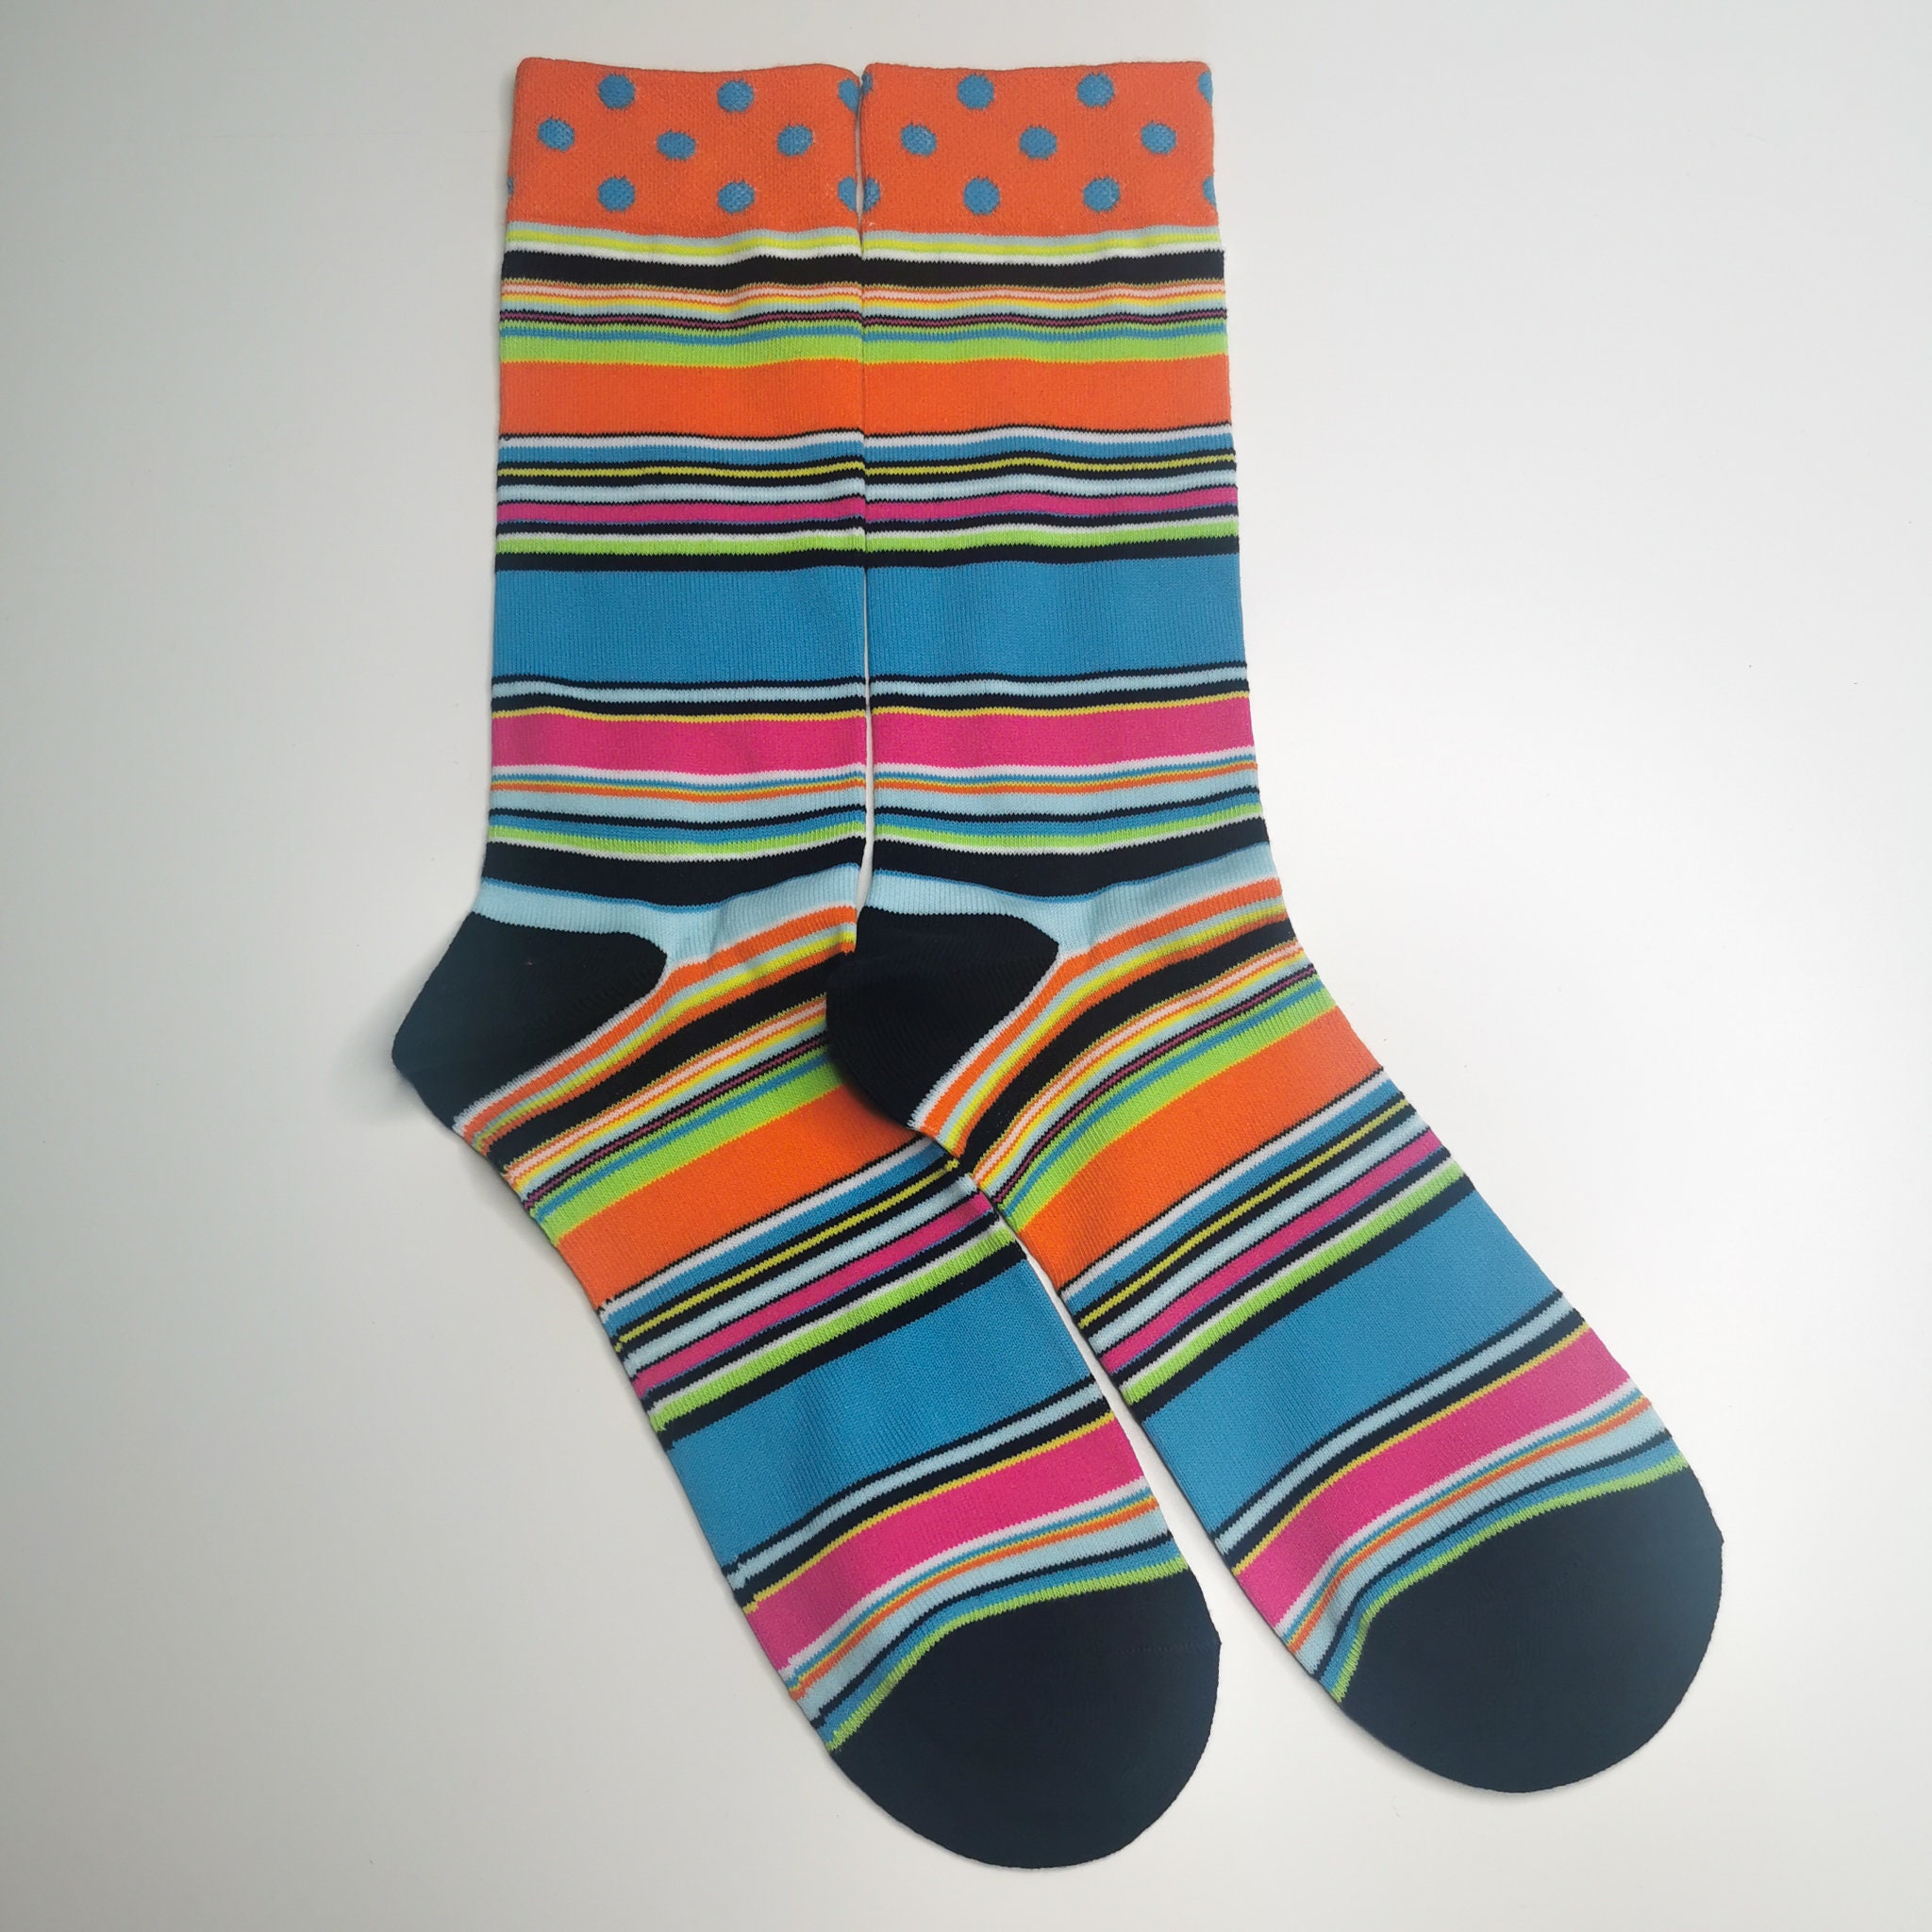 Vivid Striped and Dotted Socks Bright Colourful Soft Socks - Etsy UK